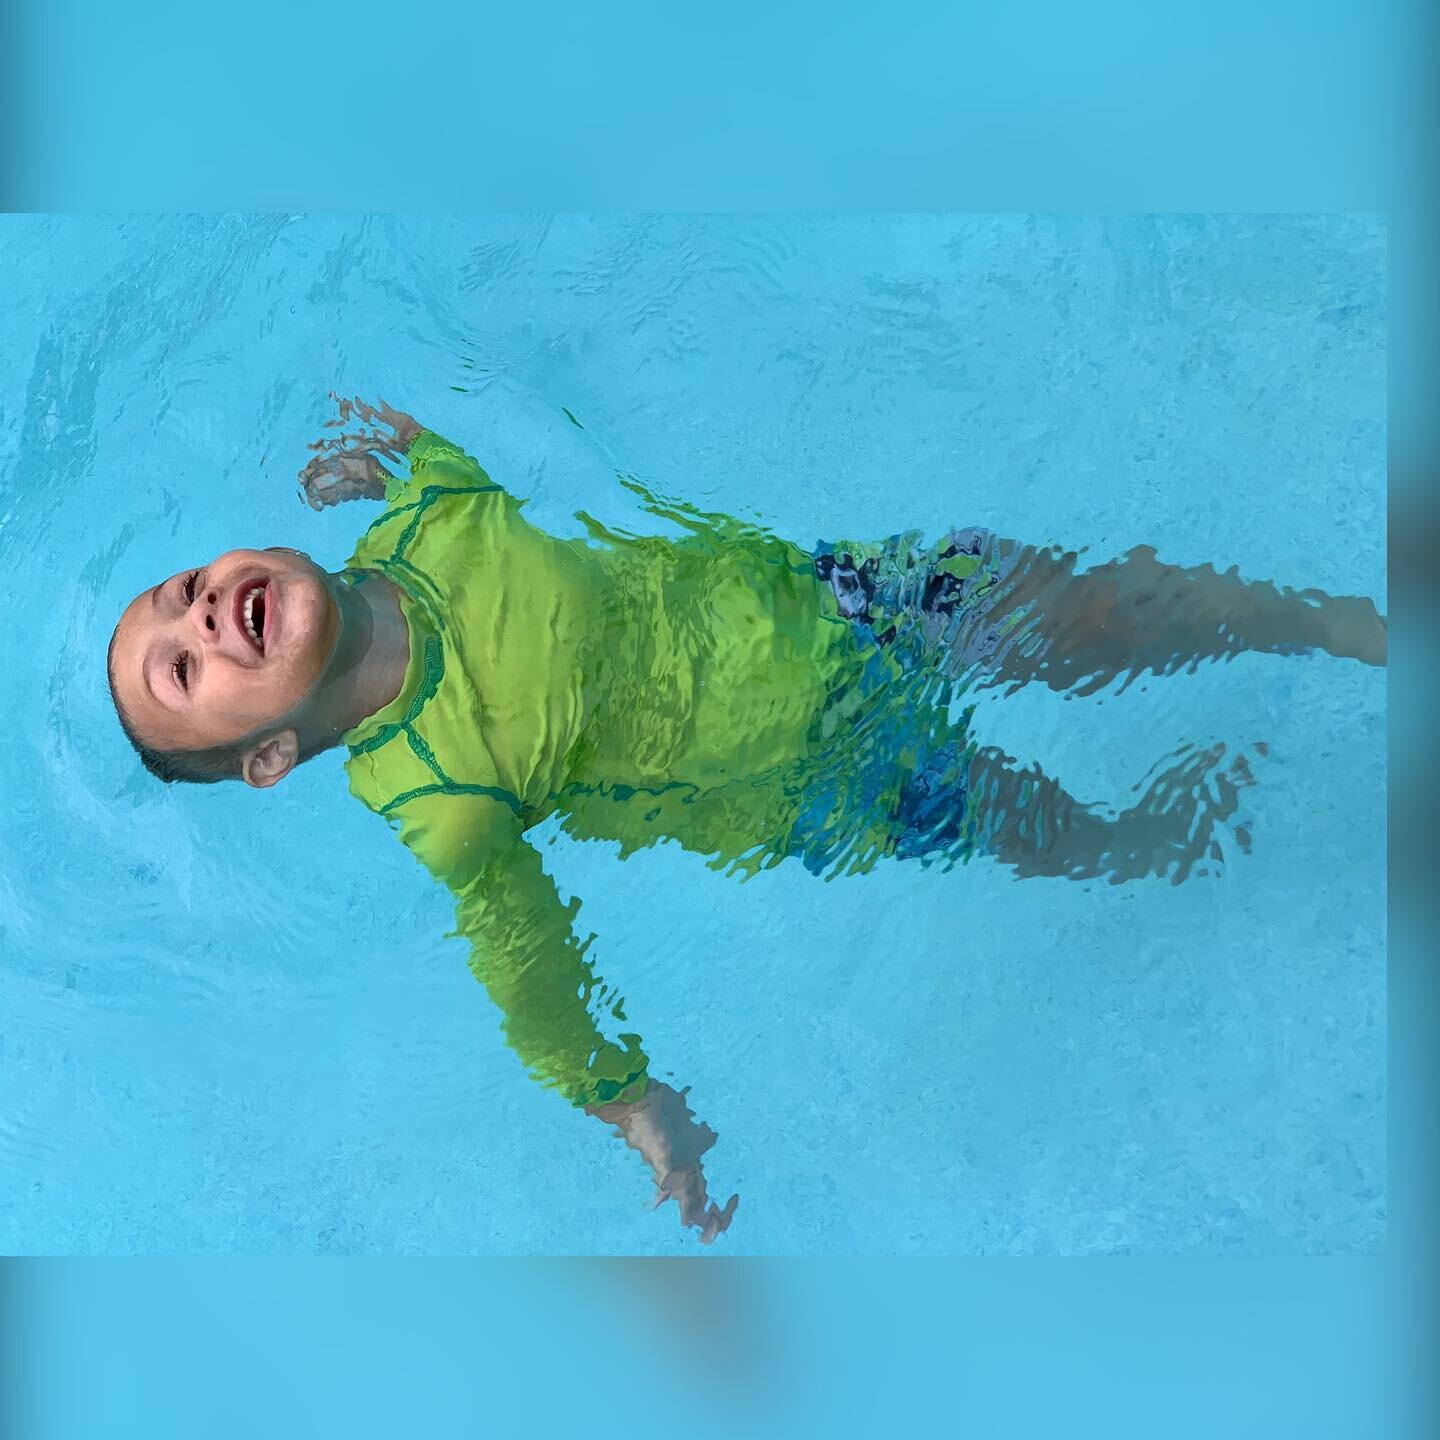 Belly up, feet up, let&rsquo;s float 🐠
.
.
.
.
.

#safetyfirst #swimtraining #swimming #pool #swimlessons #athome #lifeguard #learnhowtoswim #swiminstructor #babyswimming #sunnyislesbeach #fortlauderdale #miami #hollywood #fortlauderdalemagazine #sa